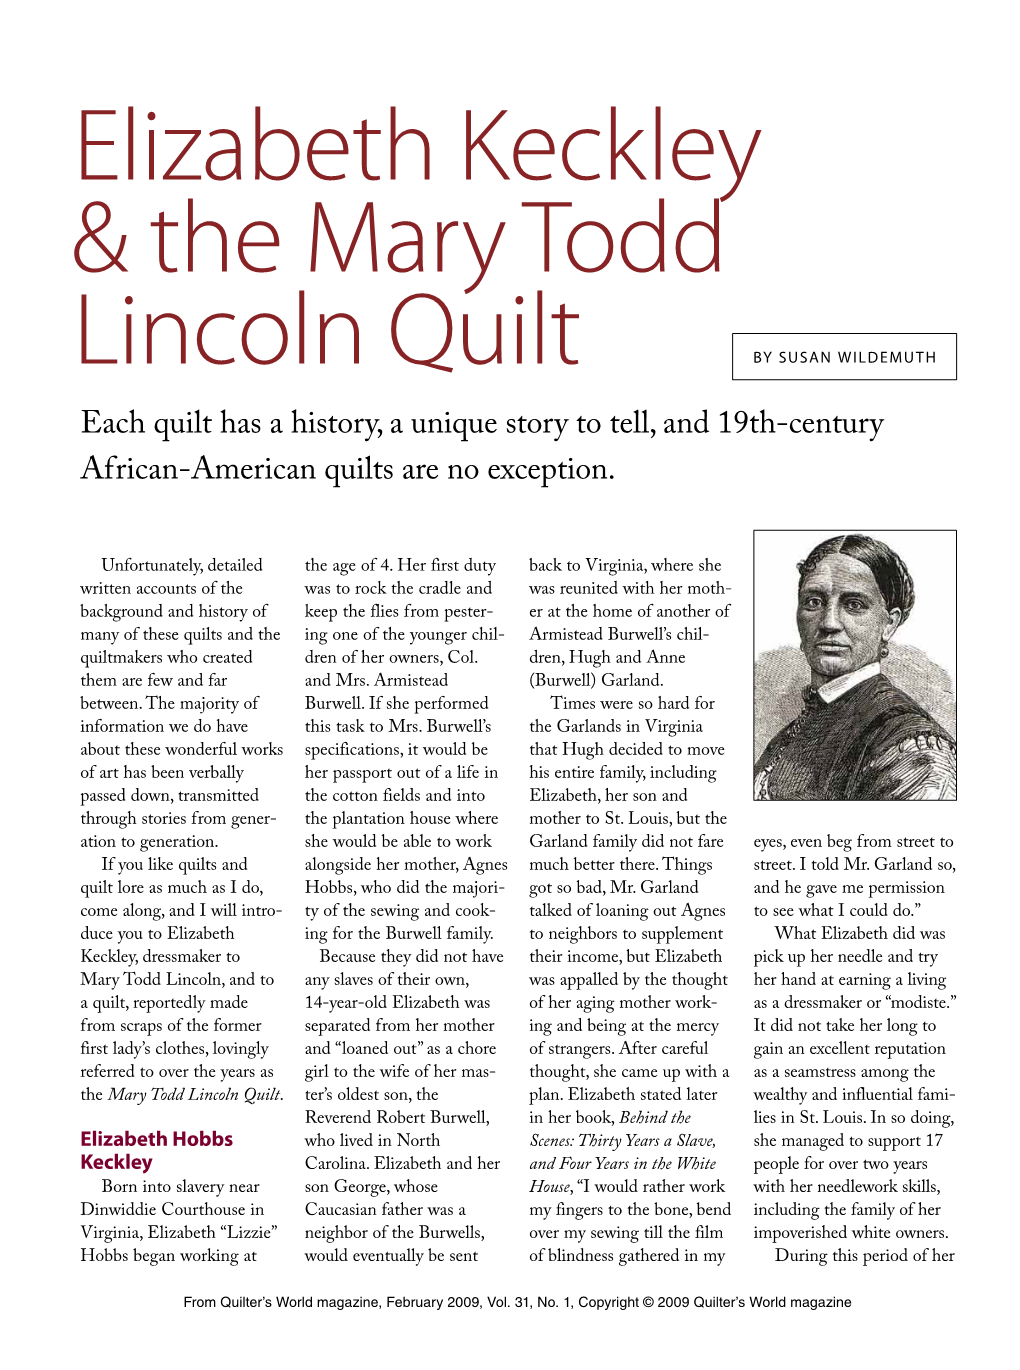 Elizabeth Keckley & the Mary Todd Lincoln Quilt